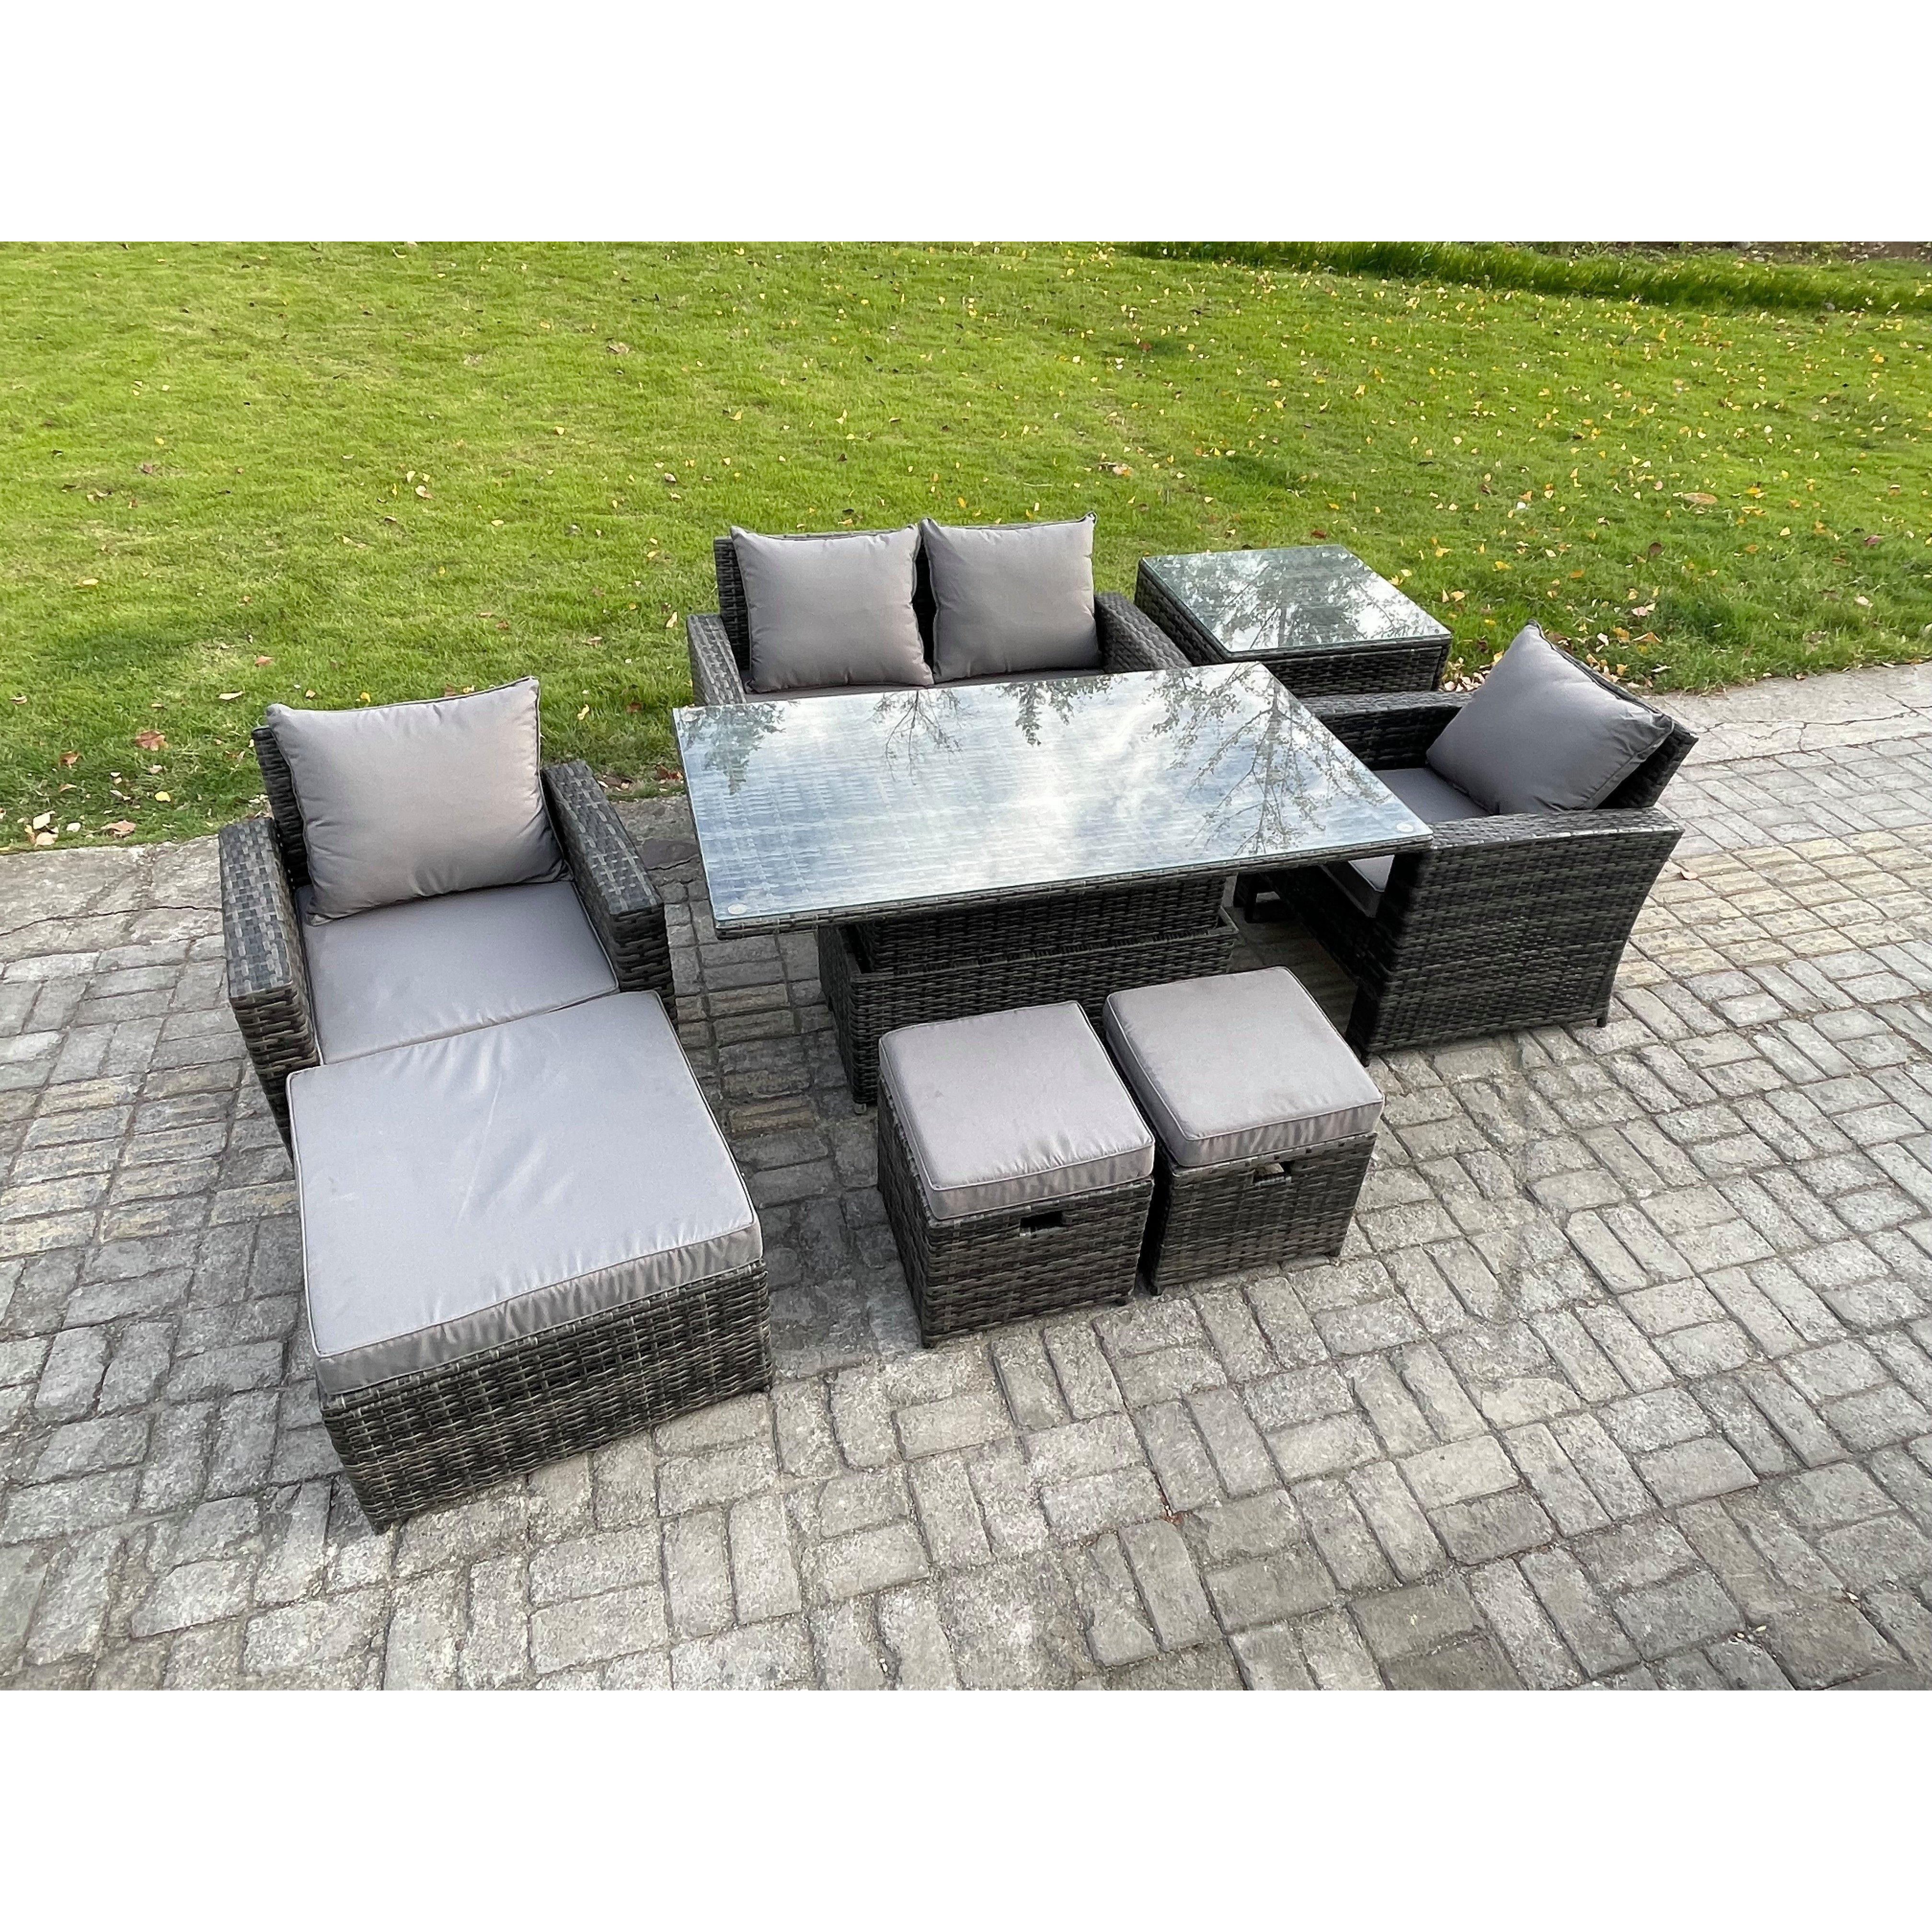 High Back Rattan Garden Furniture Sofa Sets with Height Adjustable Rising Lifting Table Side Table - image 1